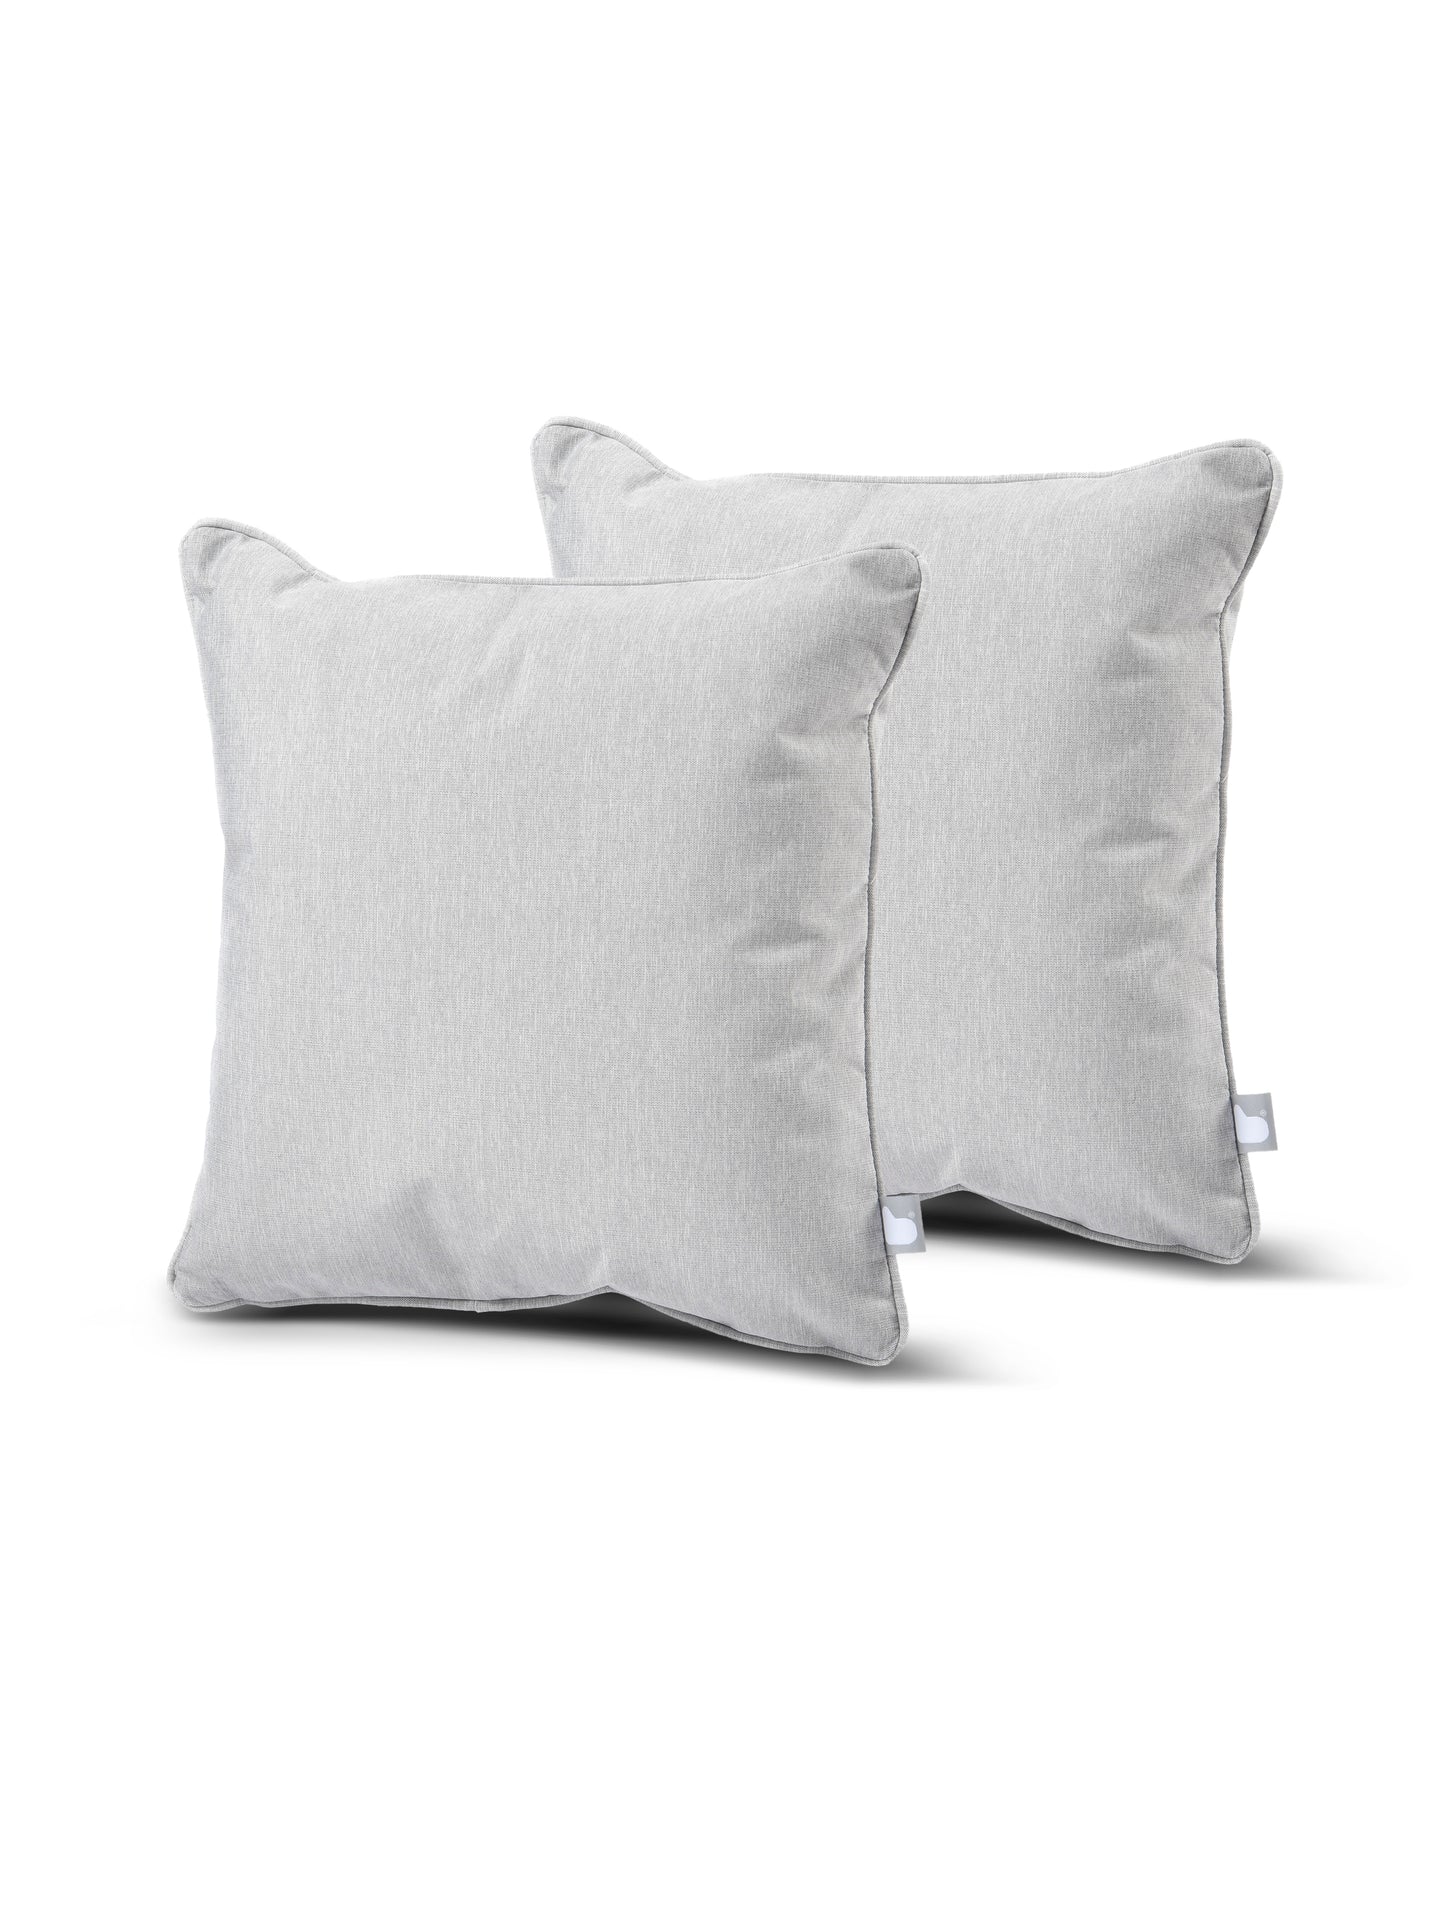 Two grey square B Cushion Twin Pack Pastel Collection by Brisks, placed at a slight angle to each other against a plain white background. The cushions have a minimalist design with subtle stitching and splash-proof fabric, creating a simple and elegant look ideal for home decor.